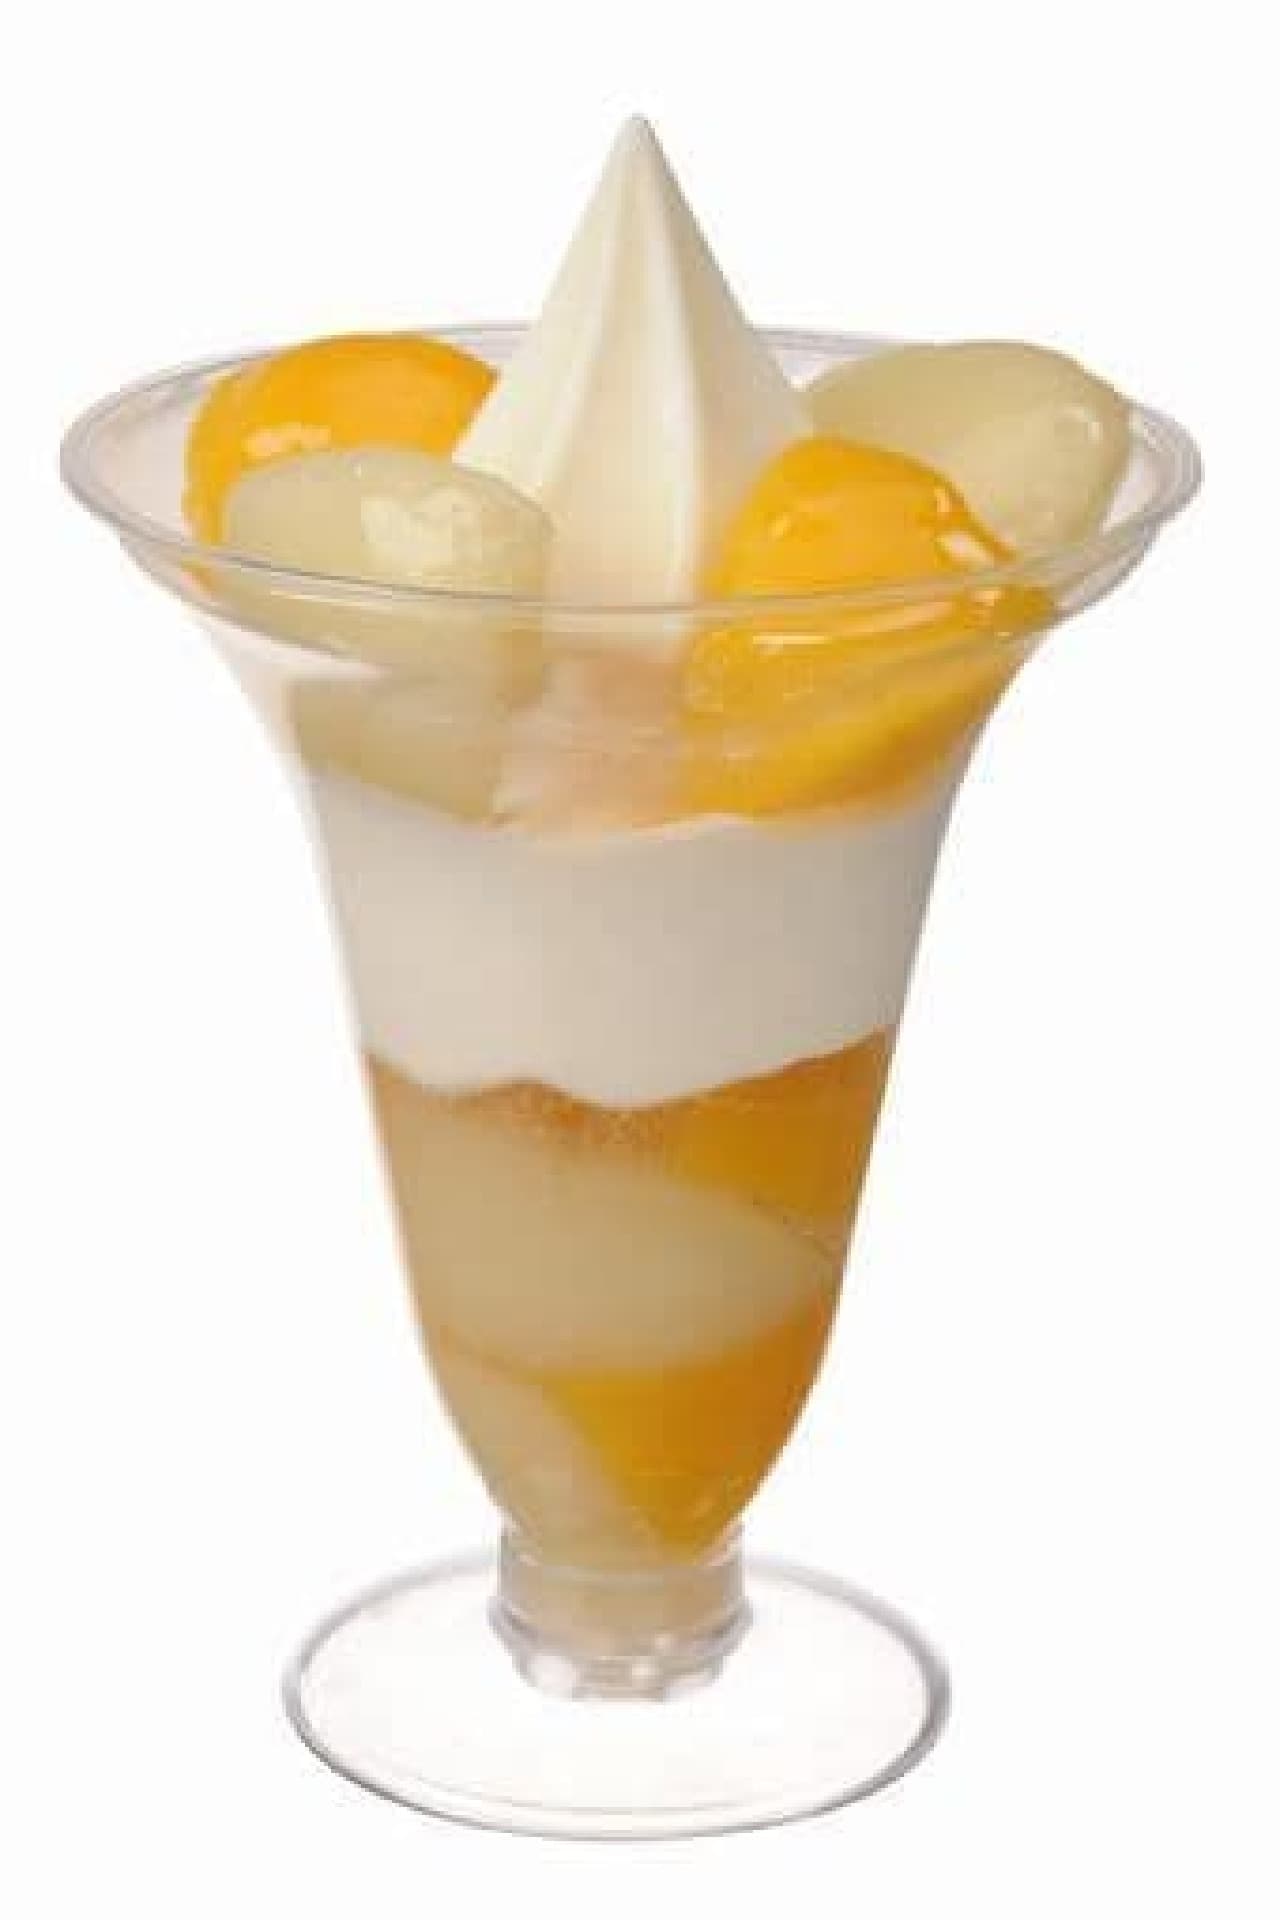 Ministop Denka's treasure sword parfait, this year "two kinds of peach"